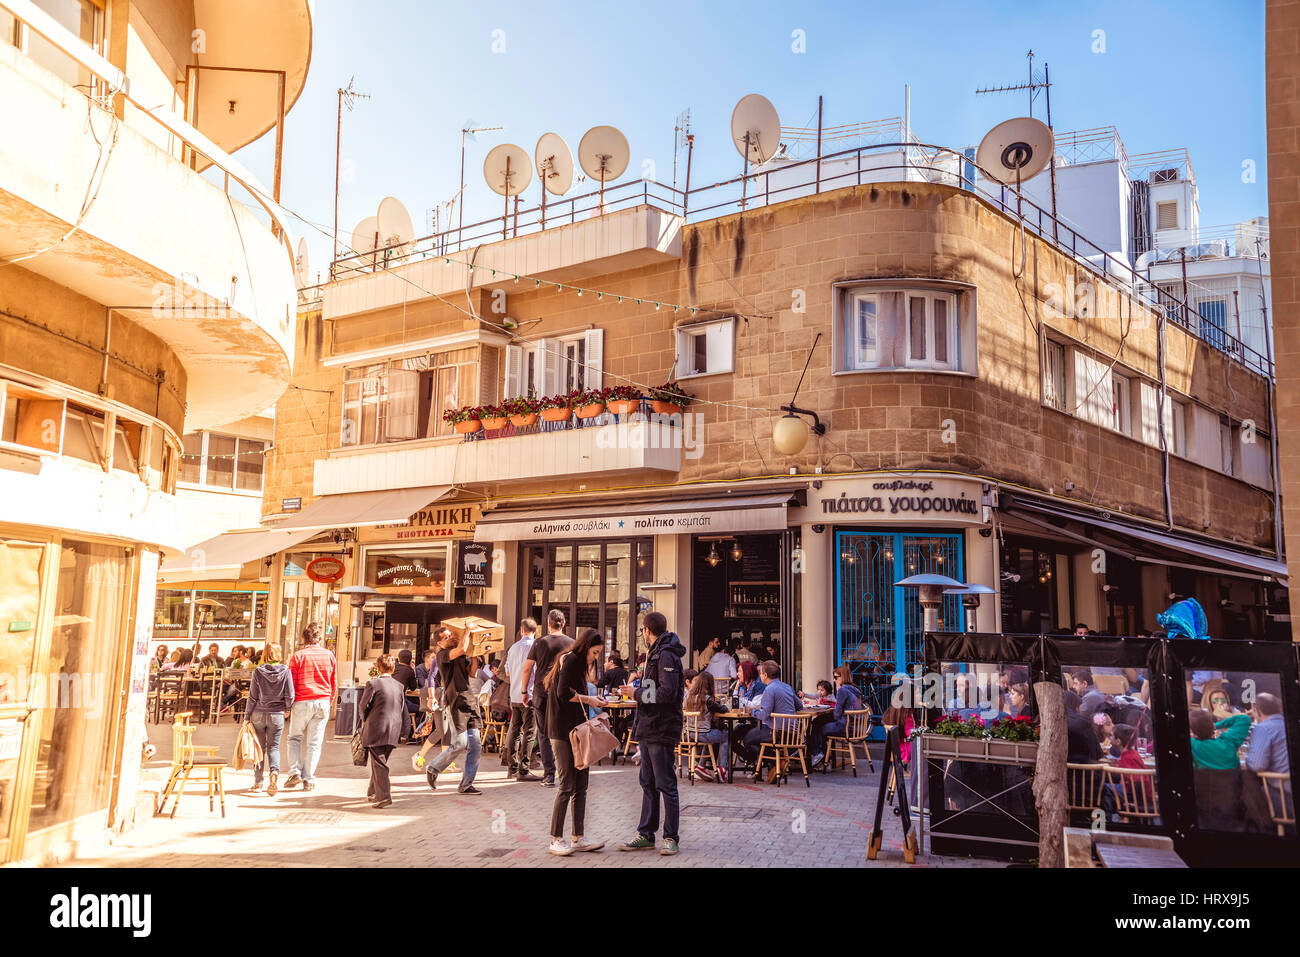 NICOSIA - APRIL 13 : People in restaurants and traditional coffee shops at Ledra street on April 13, 2015 in Nicosia, Cyprus. Ledra, main street of th Stock Photo